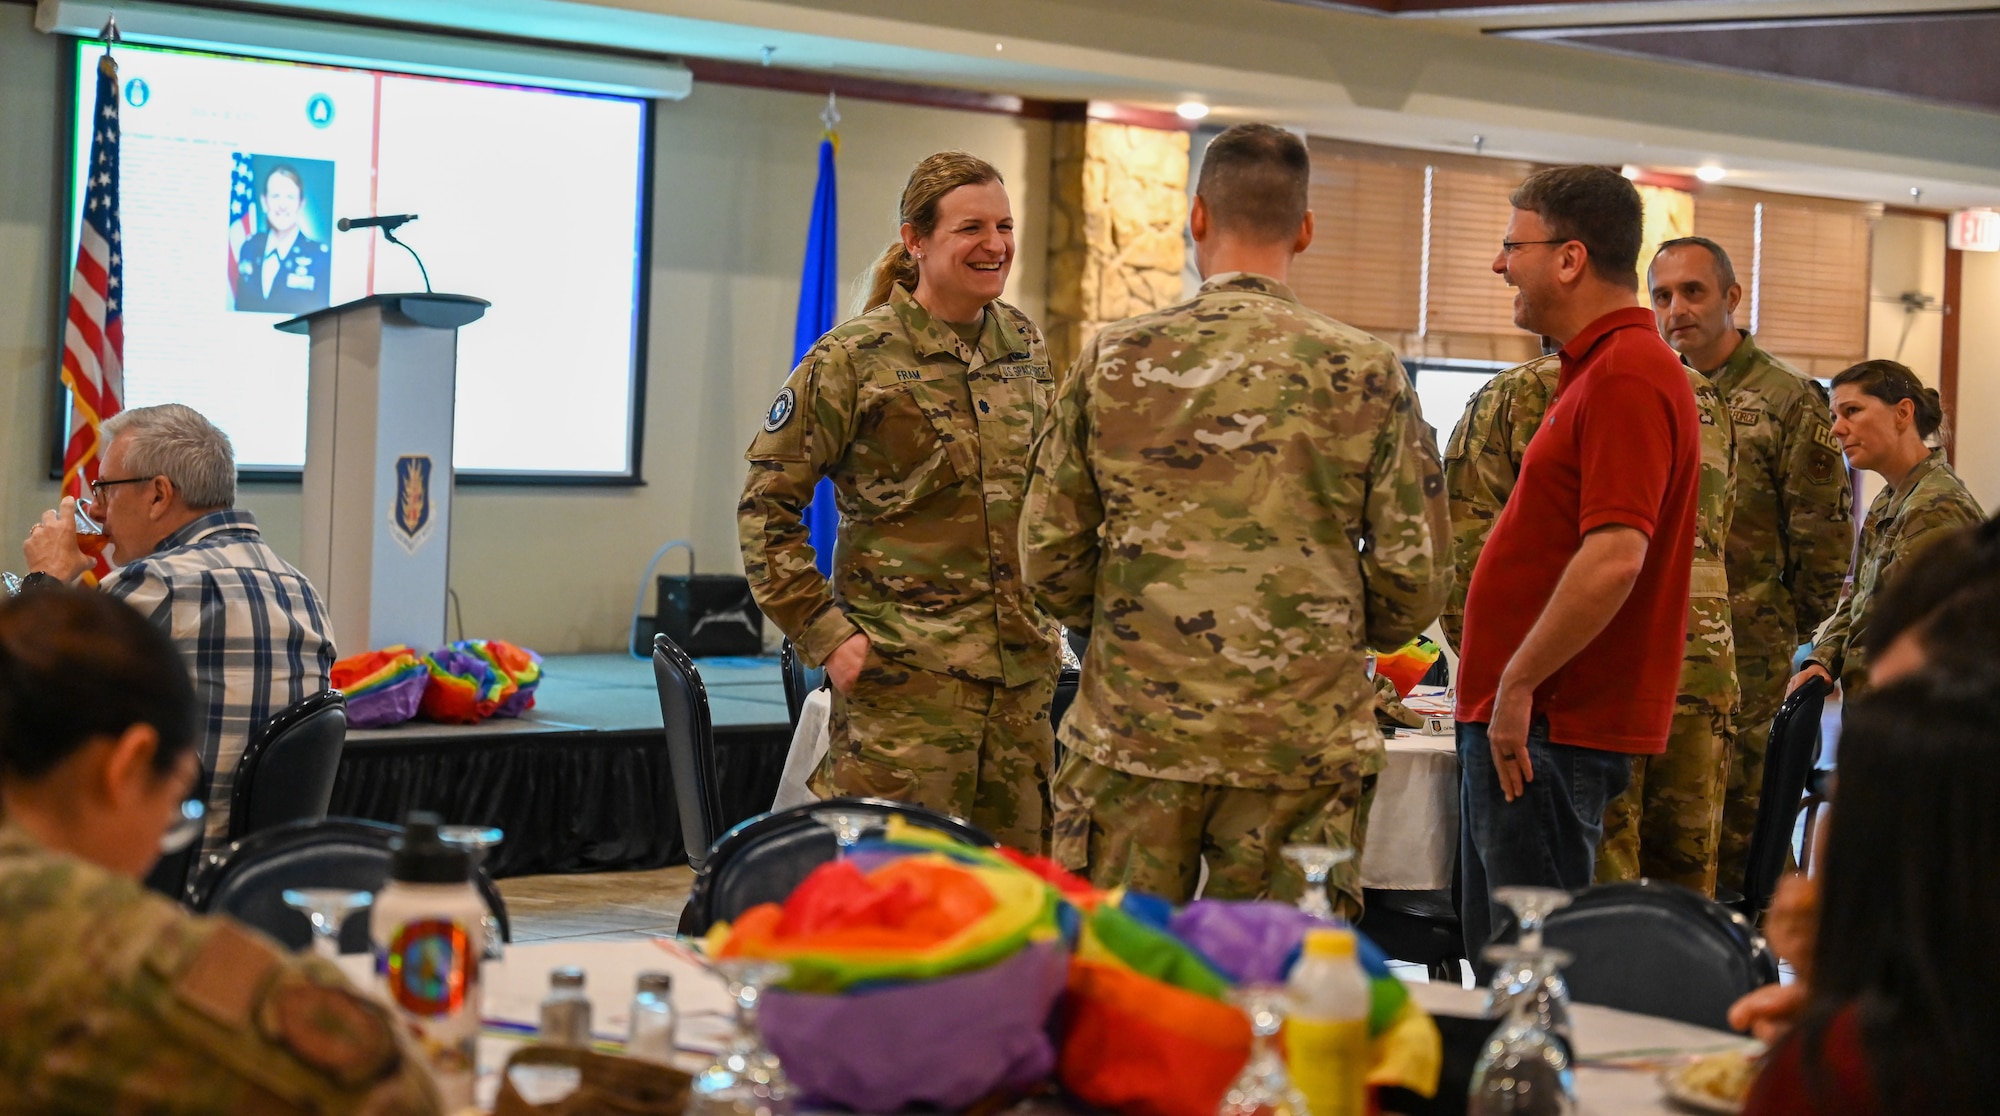 U.S. Space Force Lt Col. Bree Fram, astronautical engineer, talks with attendees at a Pride Month event held at Altus Air Force Base, June 5, 2023. Fram took questions from attendees at the event and shared her experience as a member of the LGBTQ+ community in the military. (U.S. Air Force photo by Airman 1st Class Heidi Bucins).